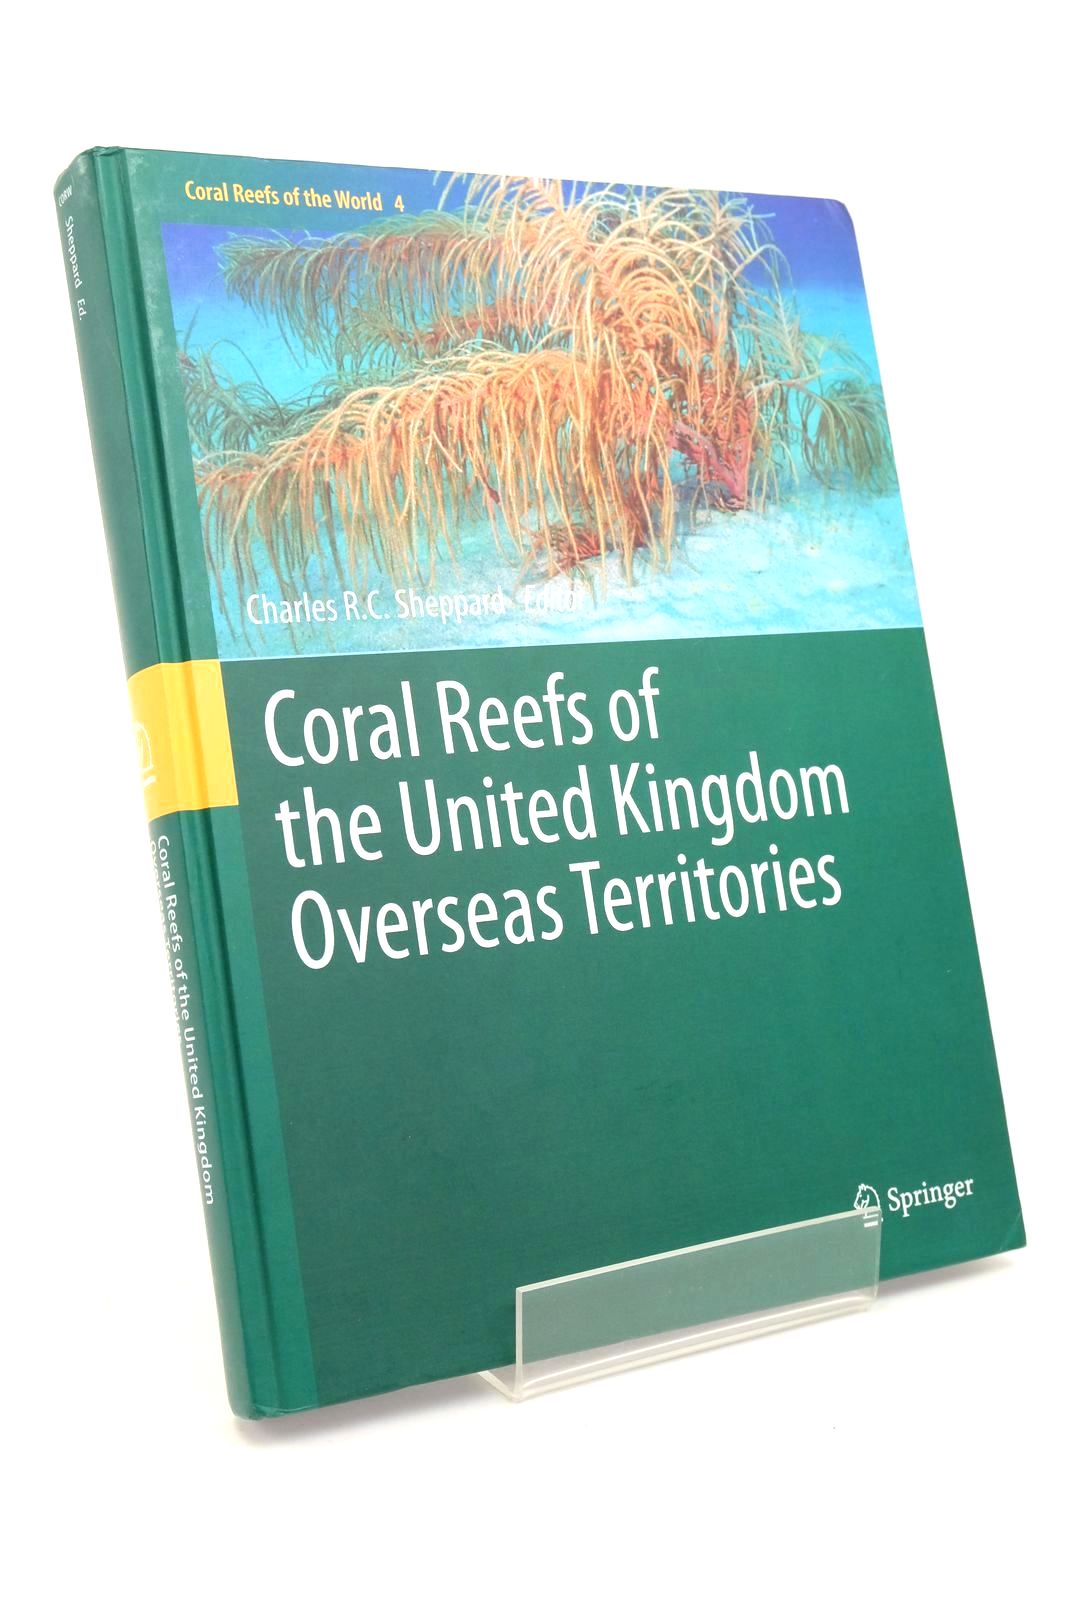 Photo of CORAL REEFS OF THE UNITED KINGDOM OVERSEAS TERRITORY written by Sheppard, Charles R.C. published by Springer (STOCK CODE: 1323041)  for sale by Stella & Rose's Books